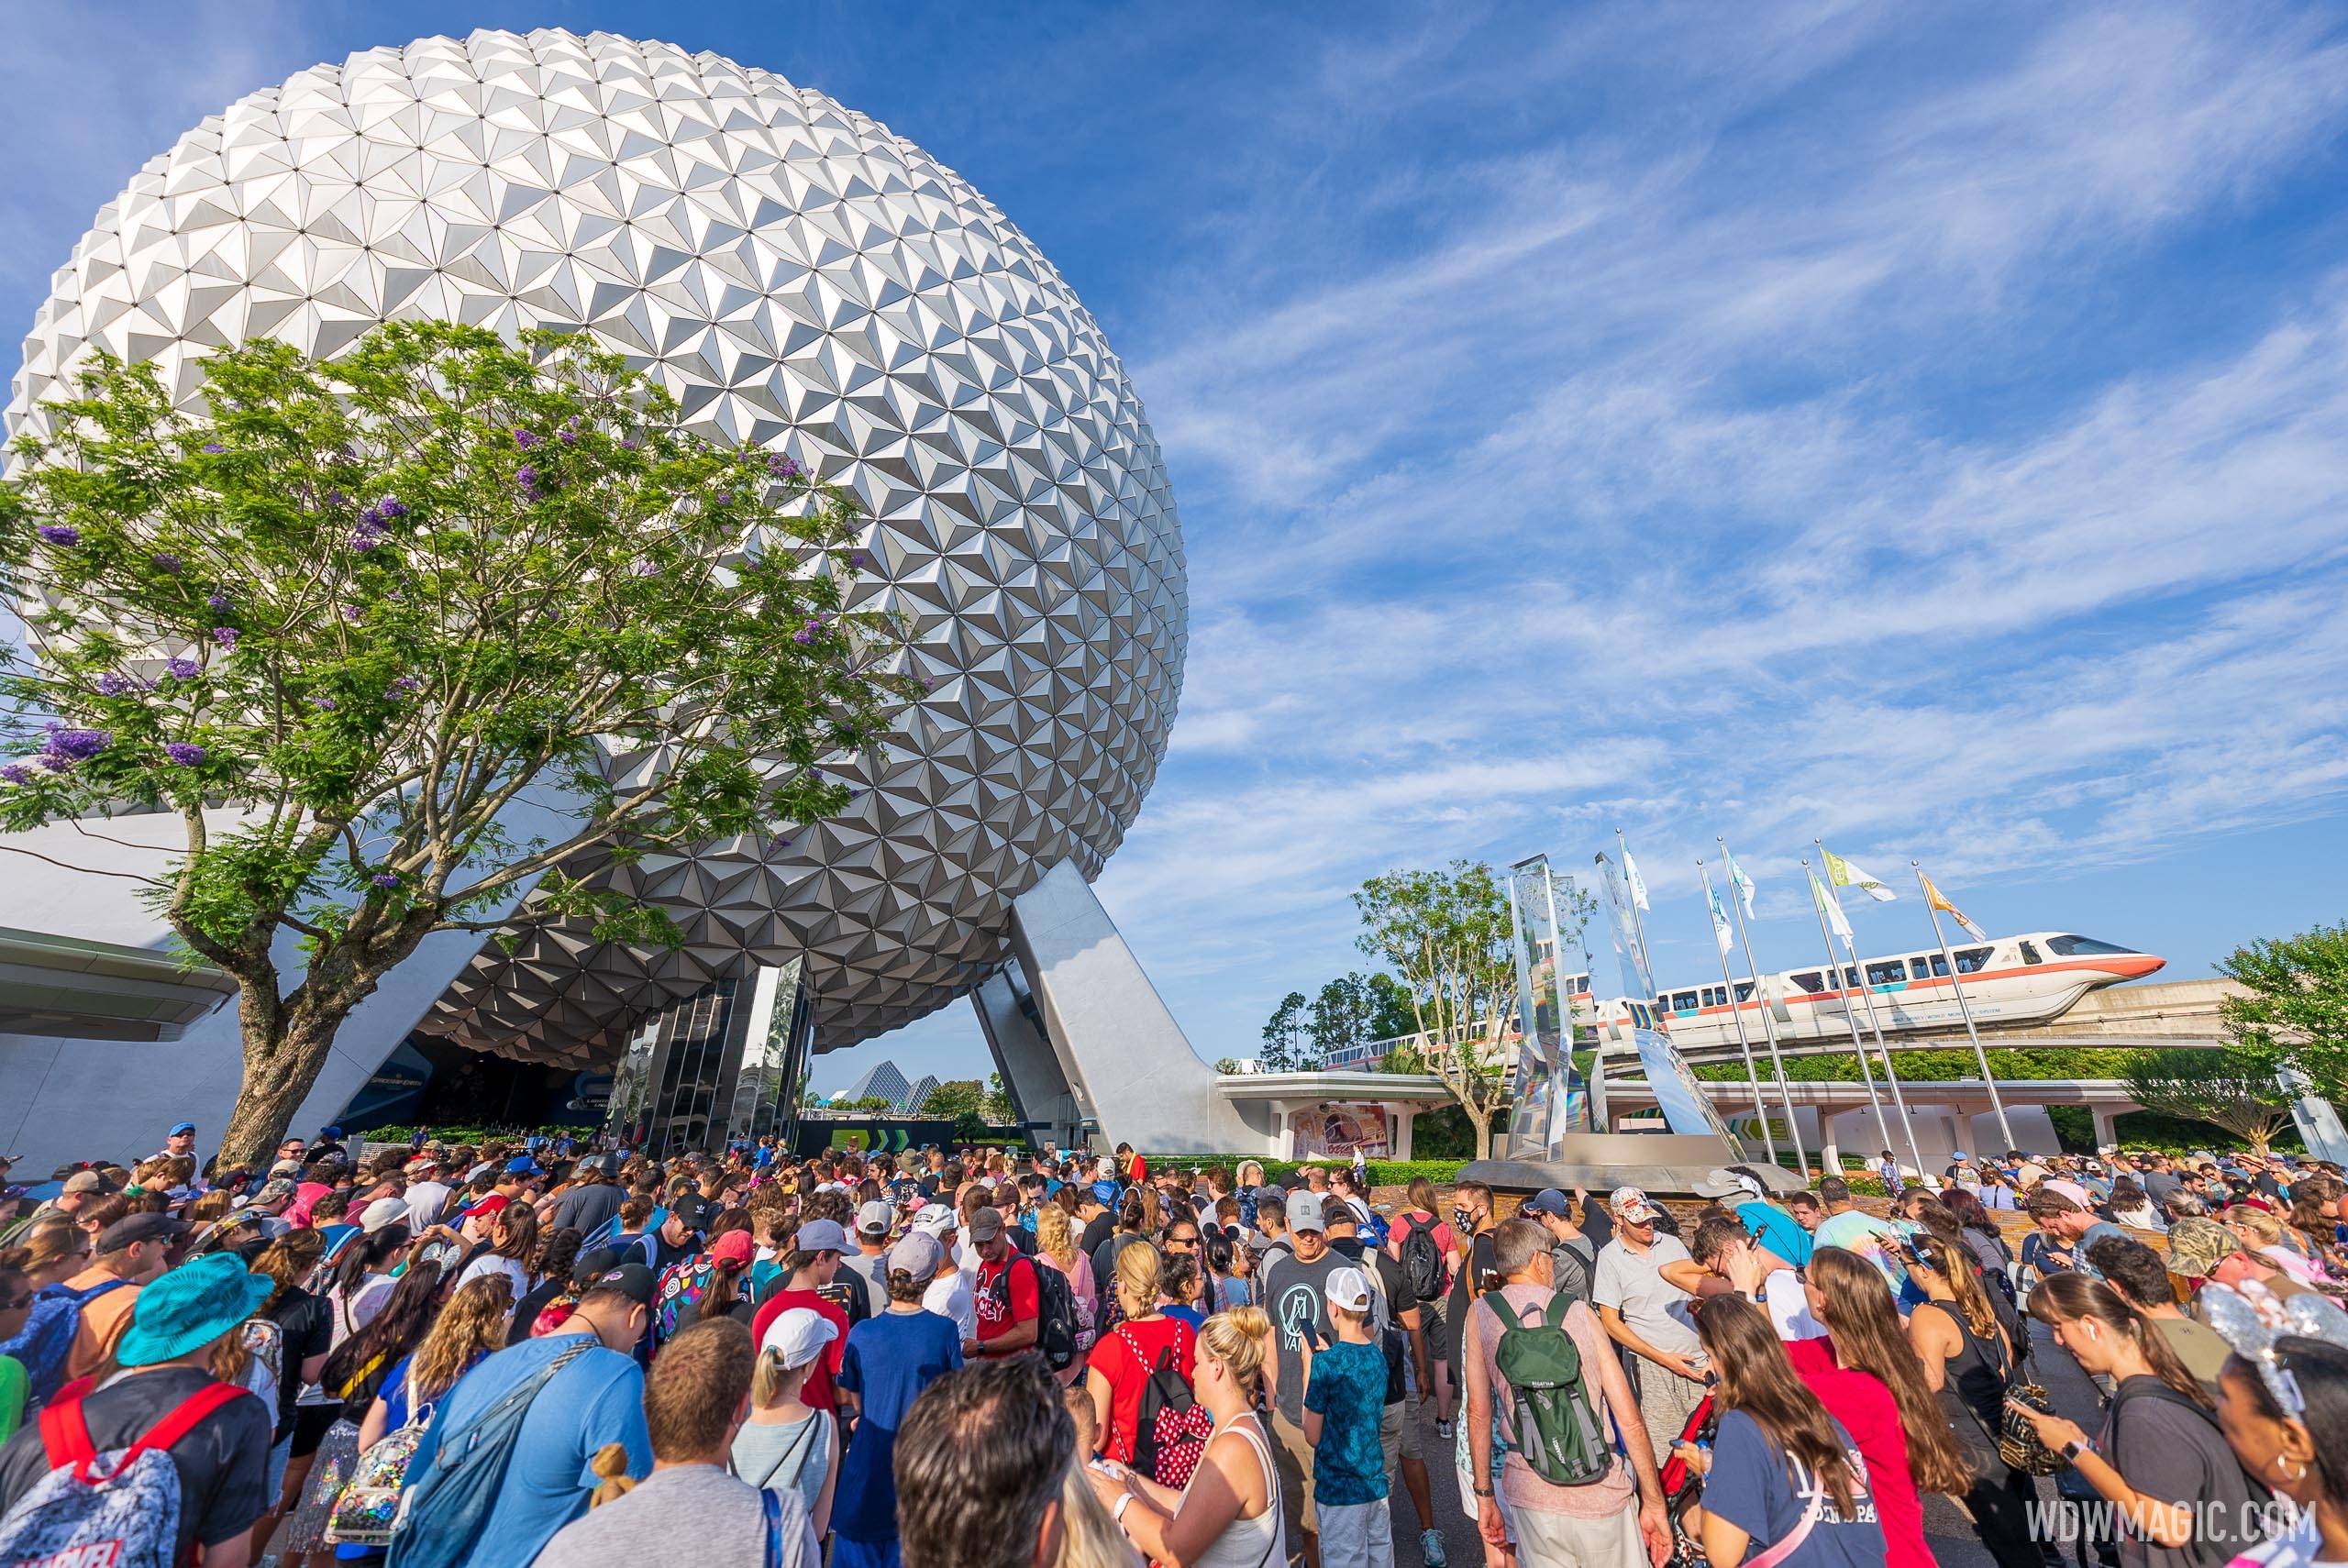 Day guests were held at Spaceship Earth until 8:25am